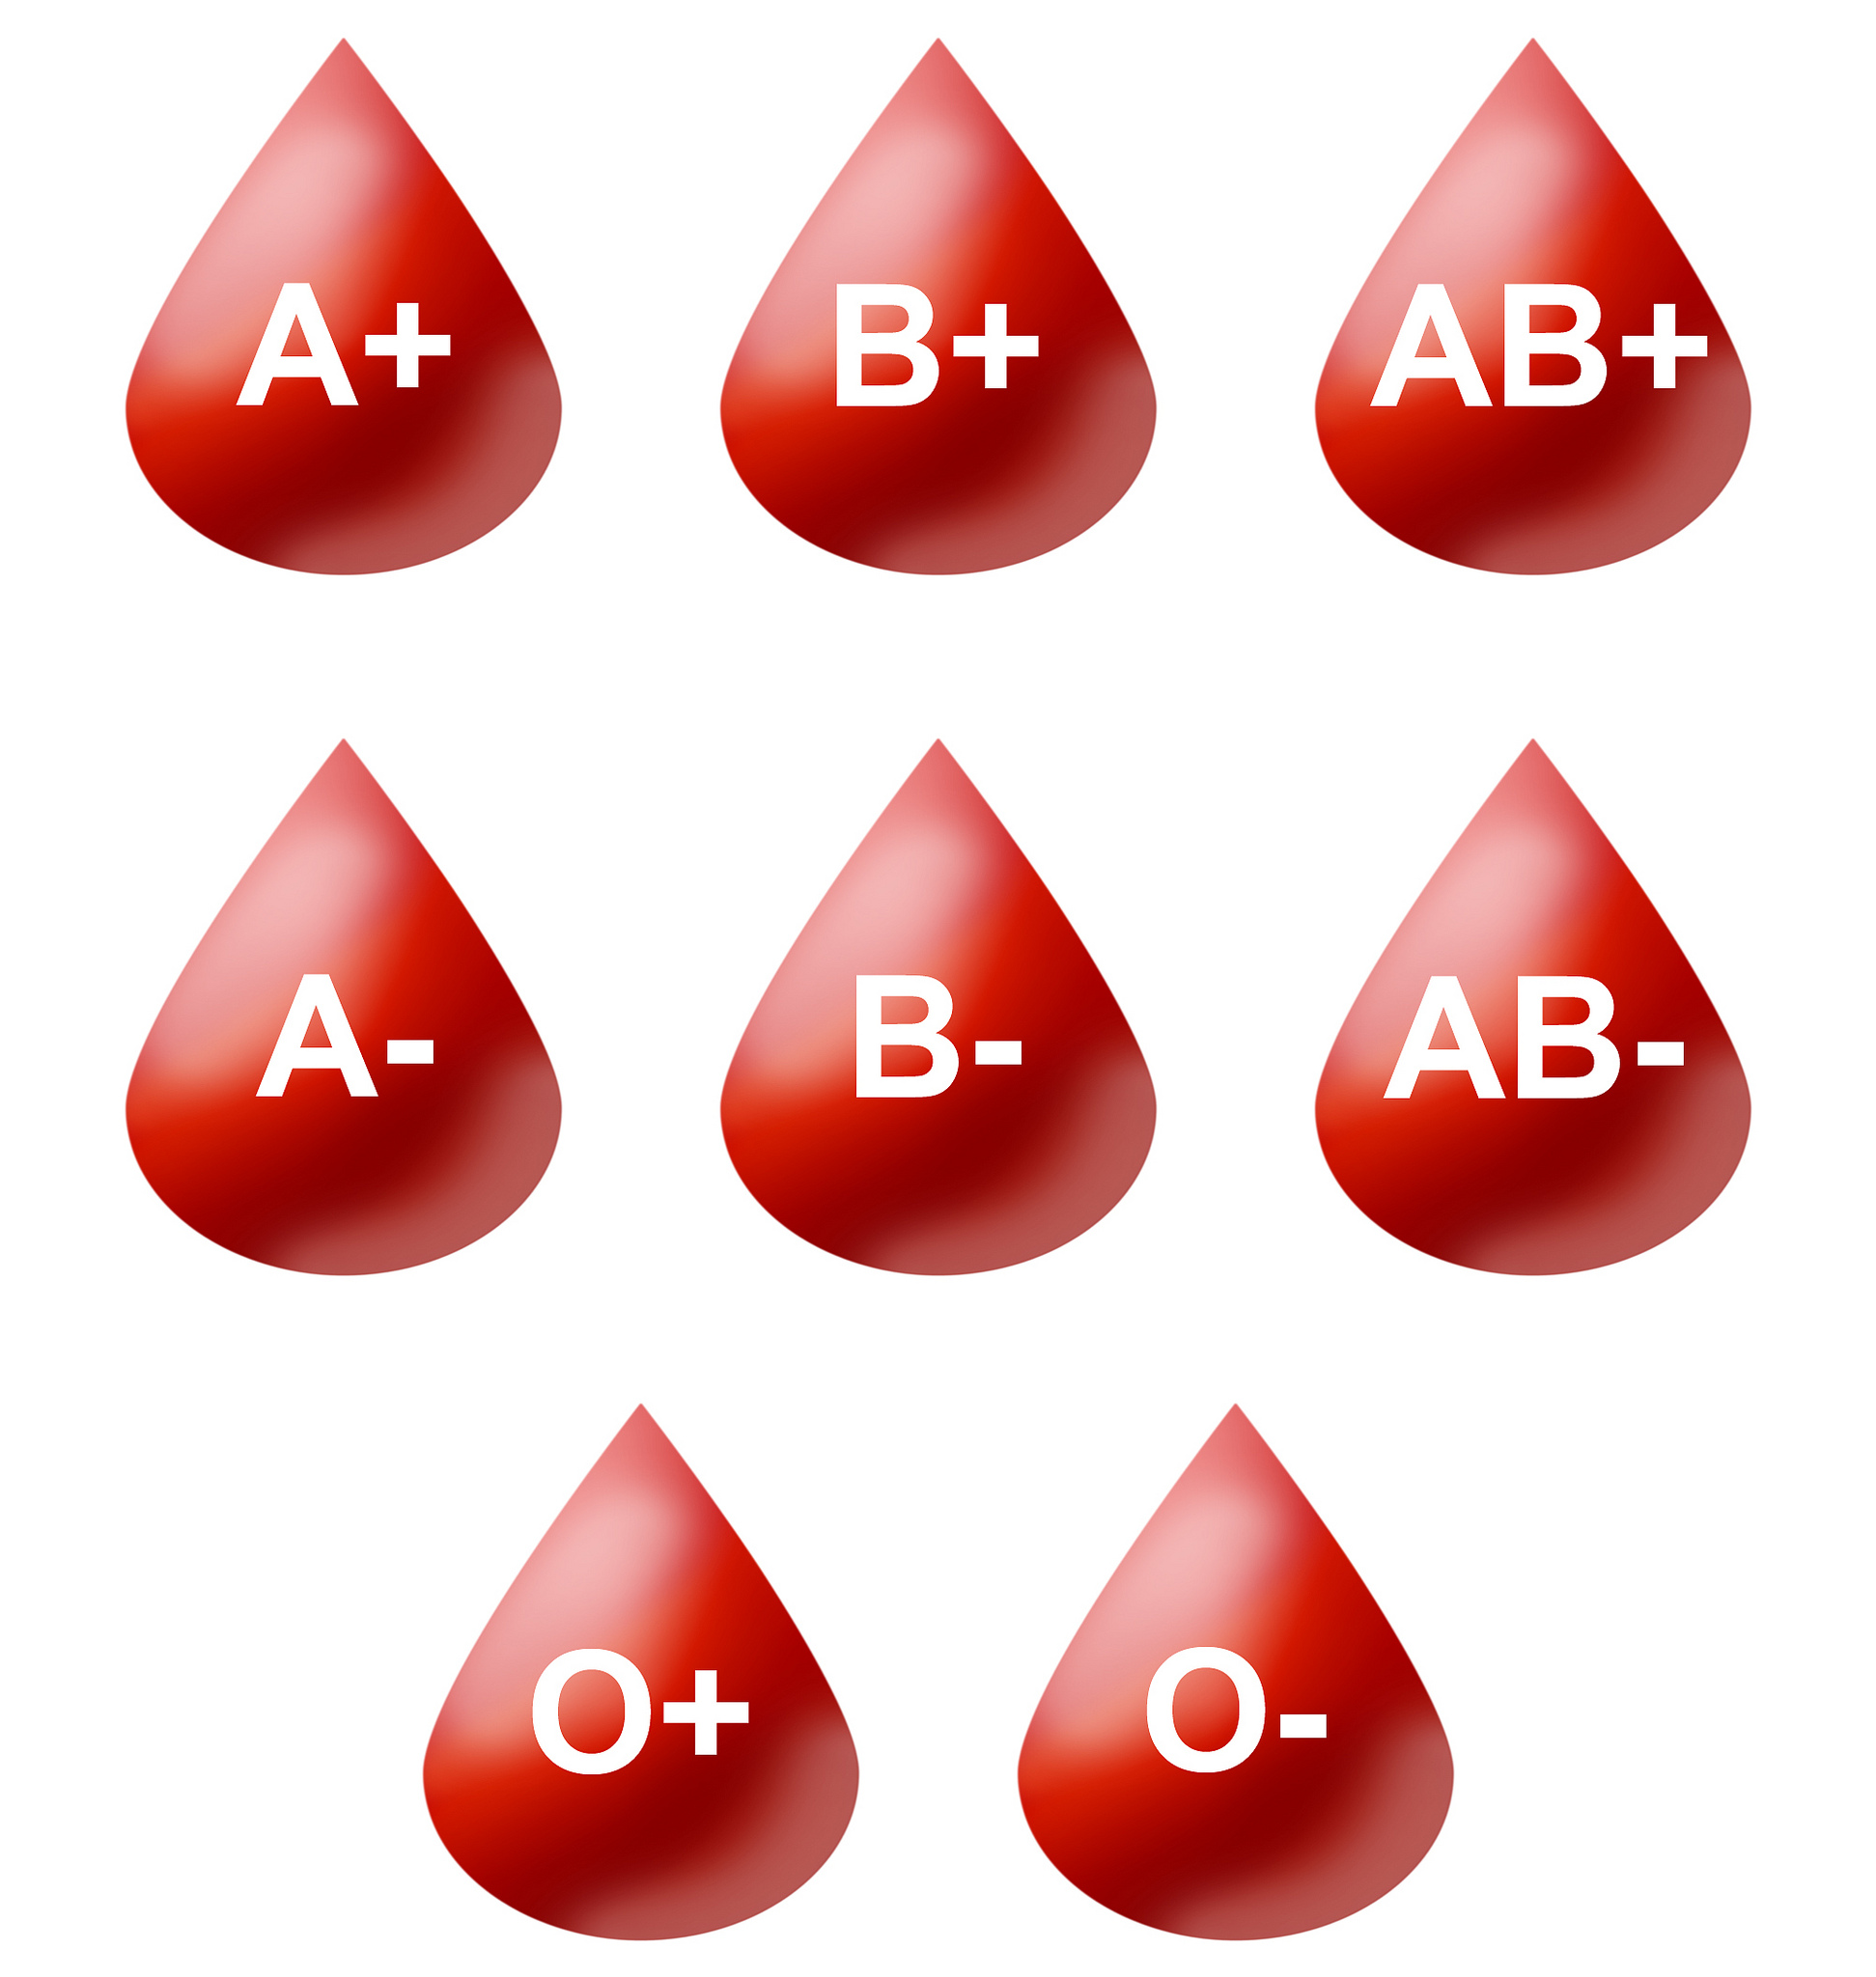 Graphic of the eight main blood types, A+, B+, AB+, A-, B-, AB-, O+, O-.